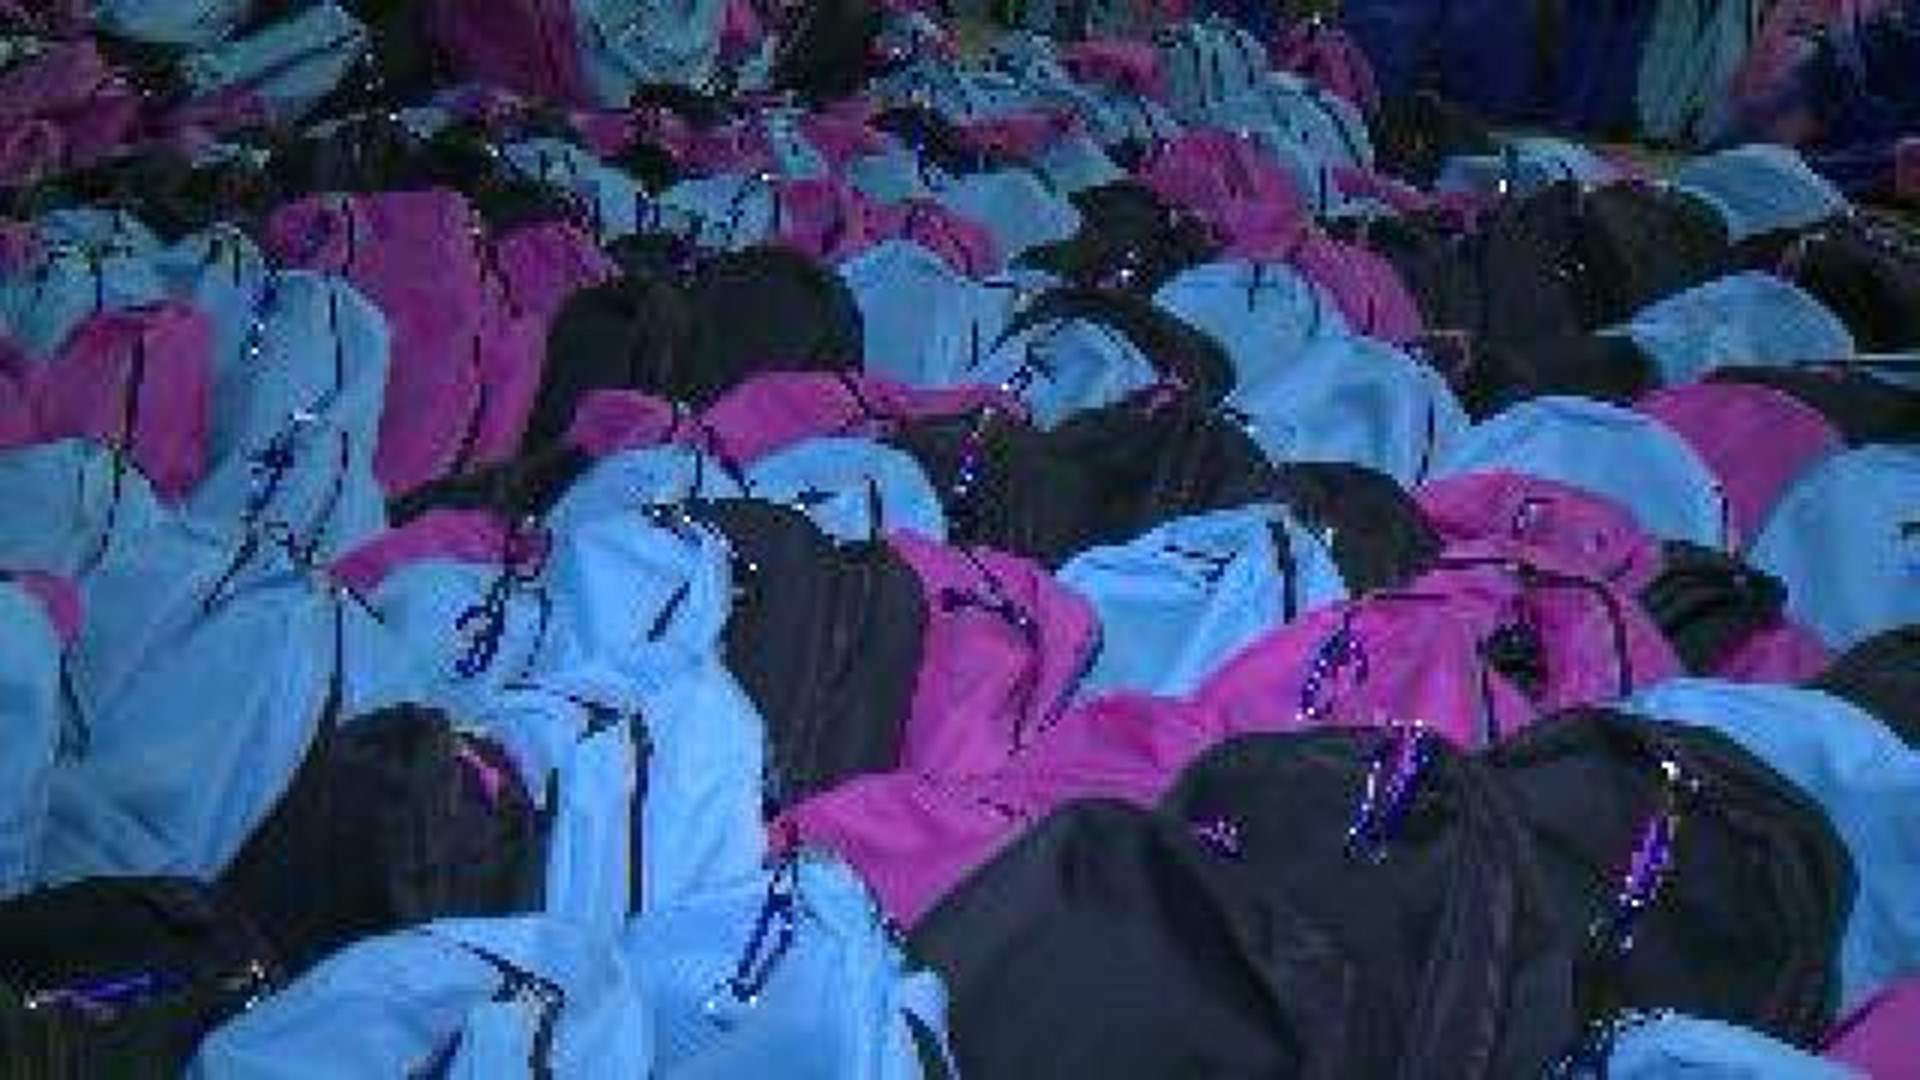 Free Backpacks to be Given Away Saturday